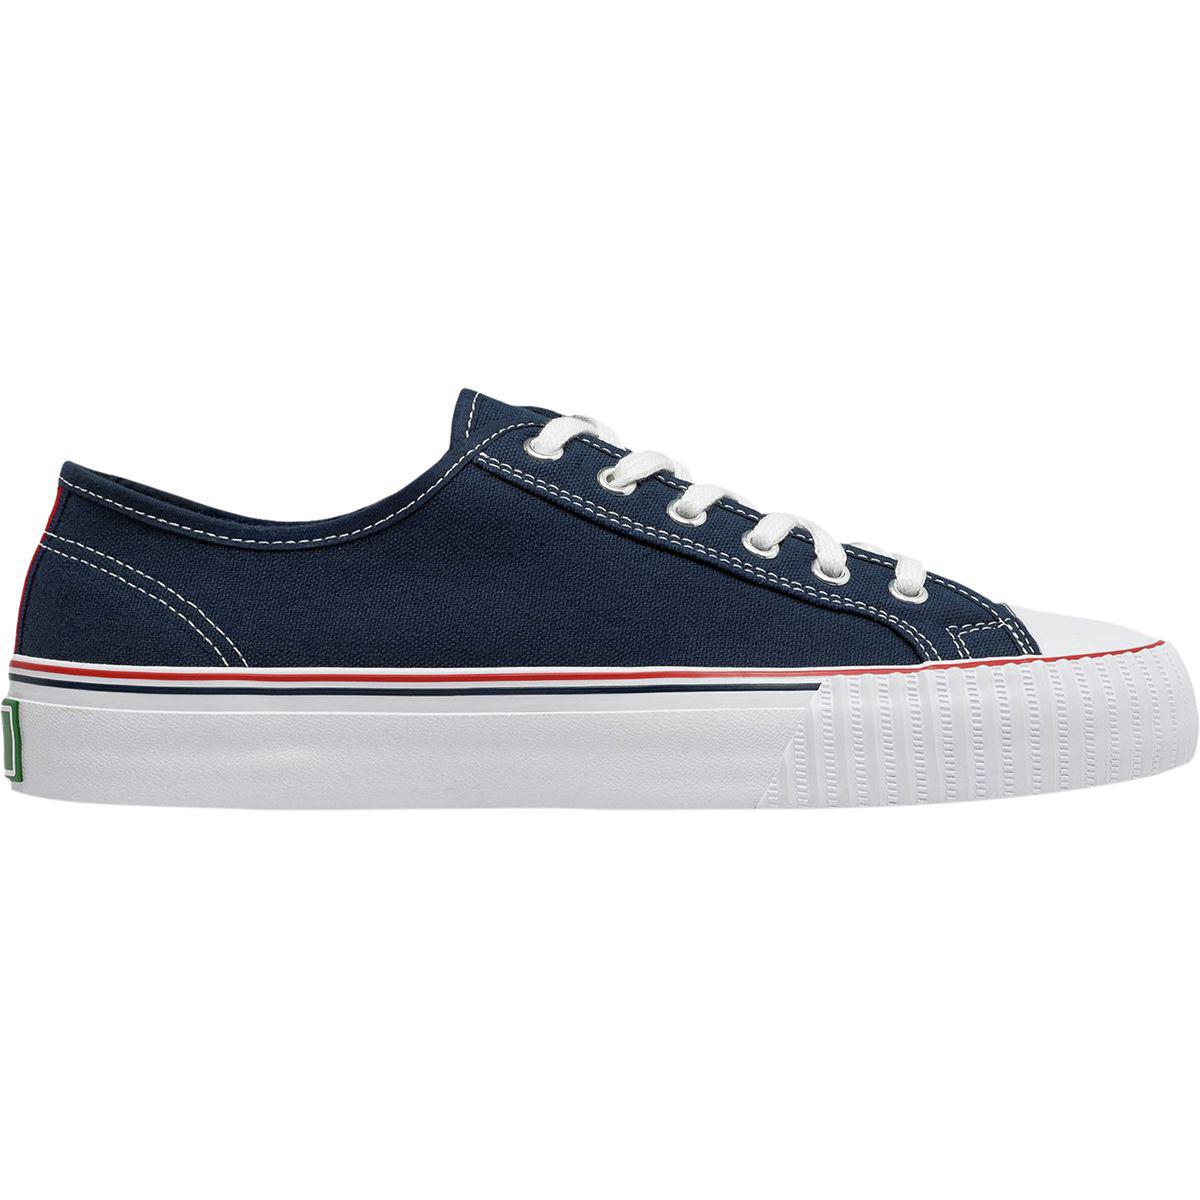 PF Flyers Canvas Center Lo Shoe in Navy (Blue) for Men - Lyst